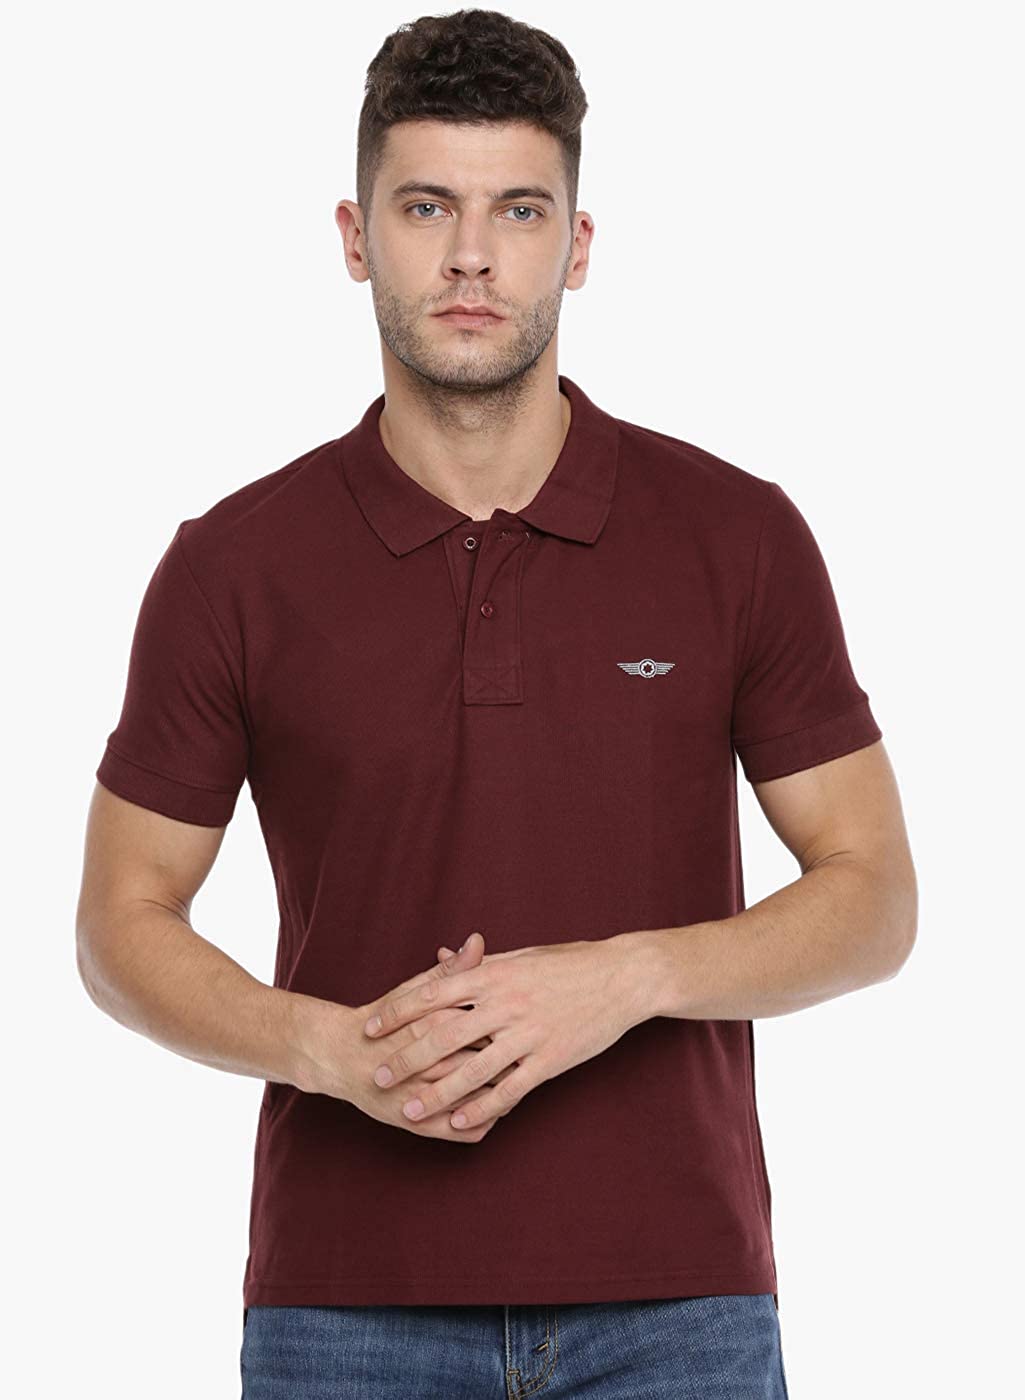 Brown Slim Fit Polo Neck T-Shirt with collar for Men - Stilento